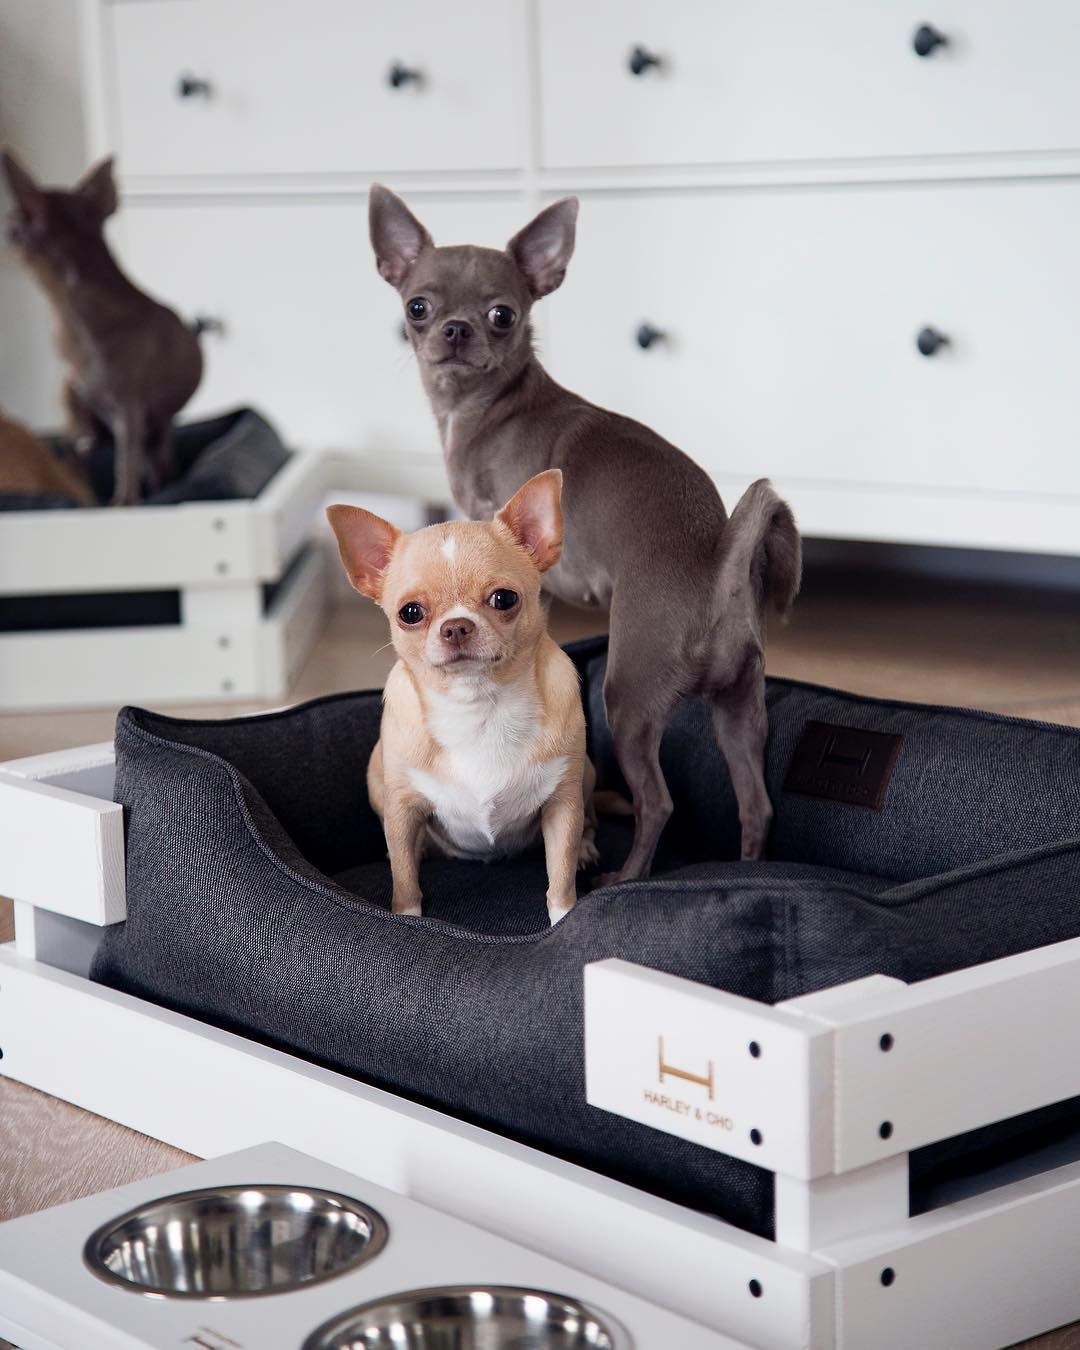 mini-pallet-bed-1 +80 Adorable Dog Bed Designs That Will Surprise You